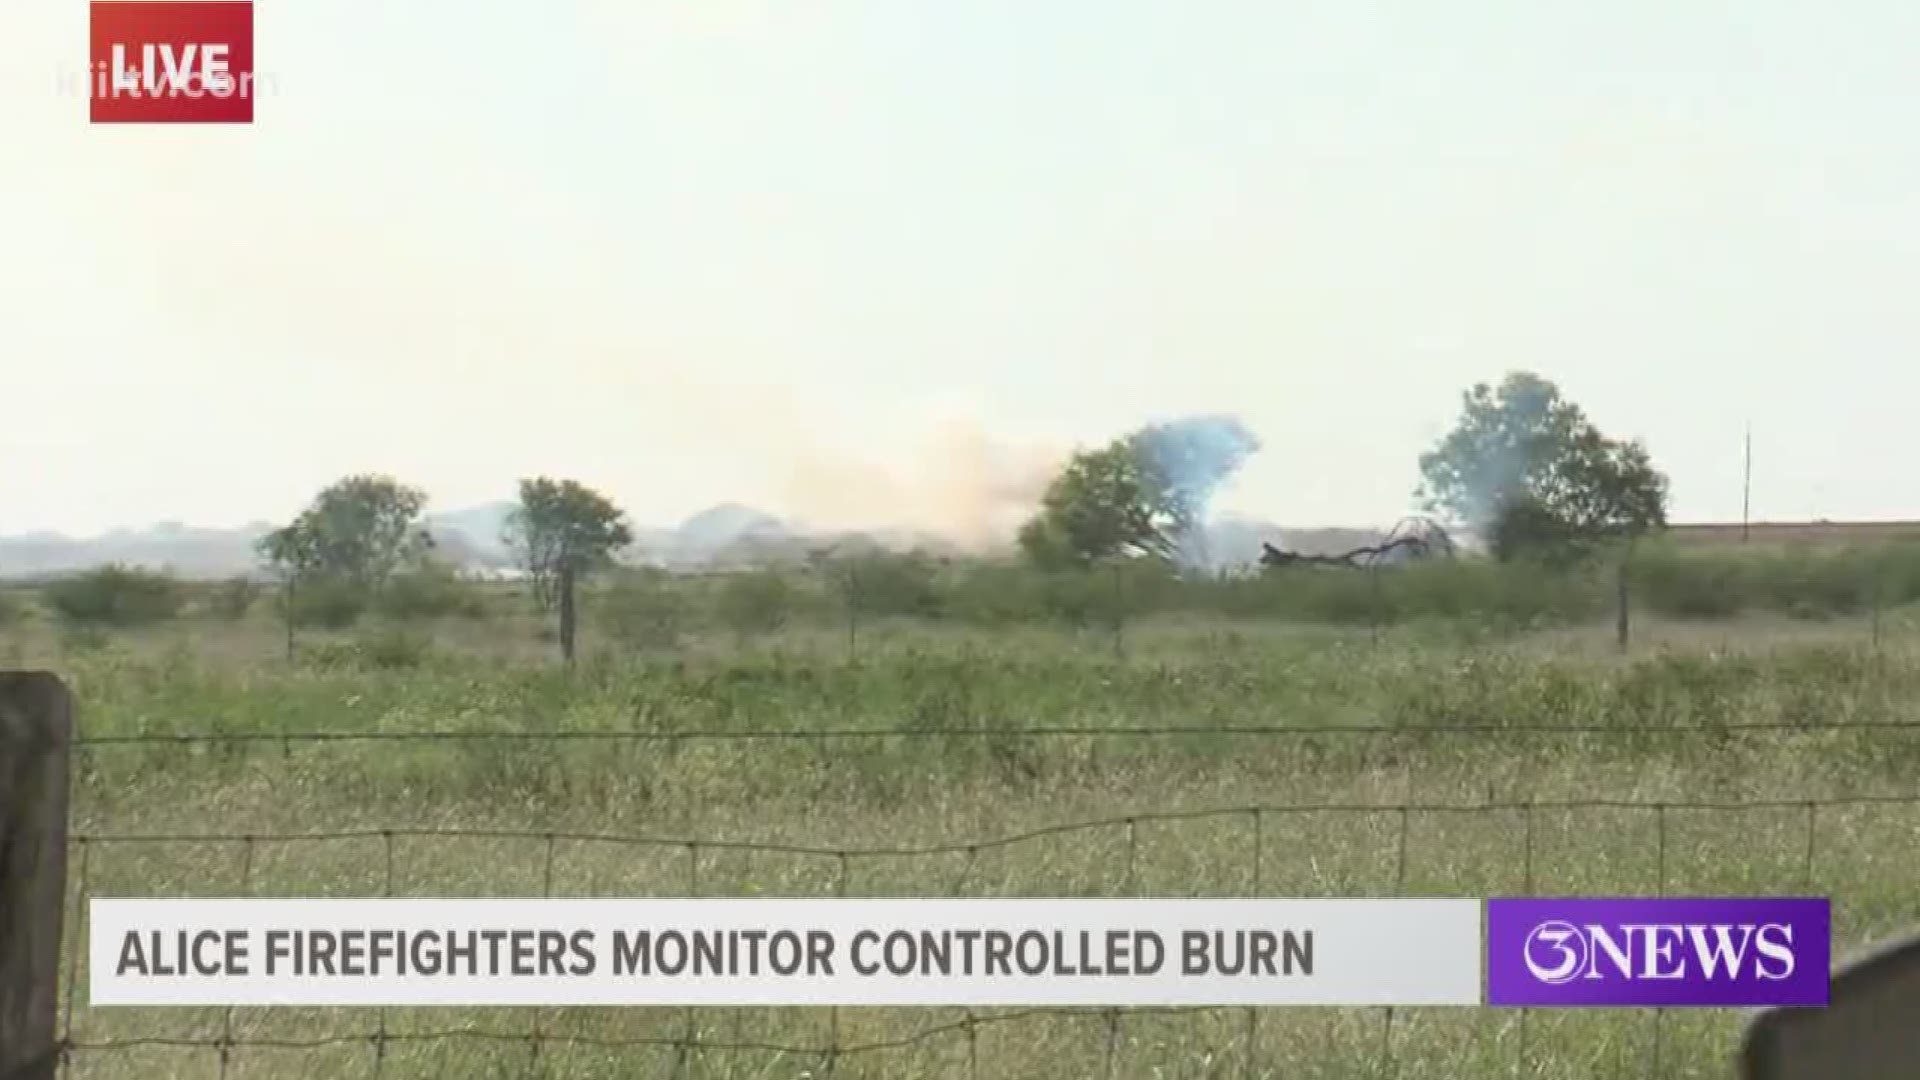 Firefighters from Agua Dulce and Banquete were on standby Monday afternoon as they monitored a controlled burn that came dangerously close to some nearby houses on Highway 44 and County Road 93.